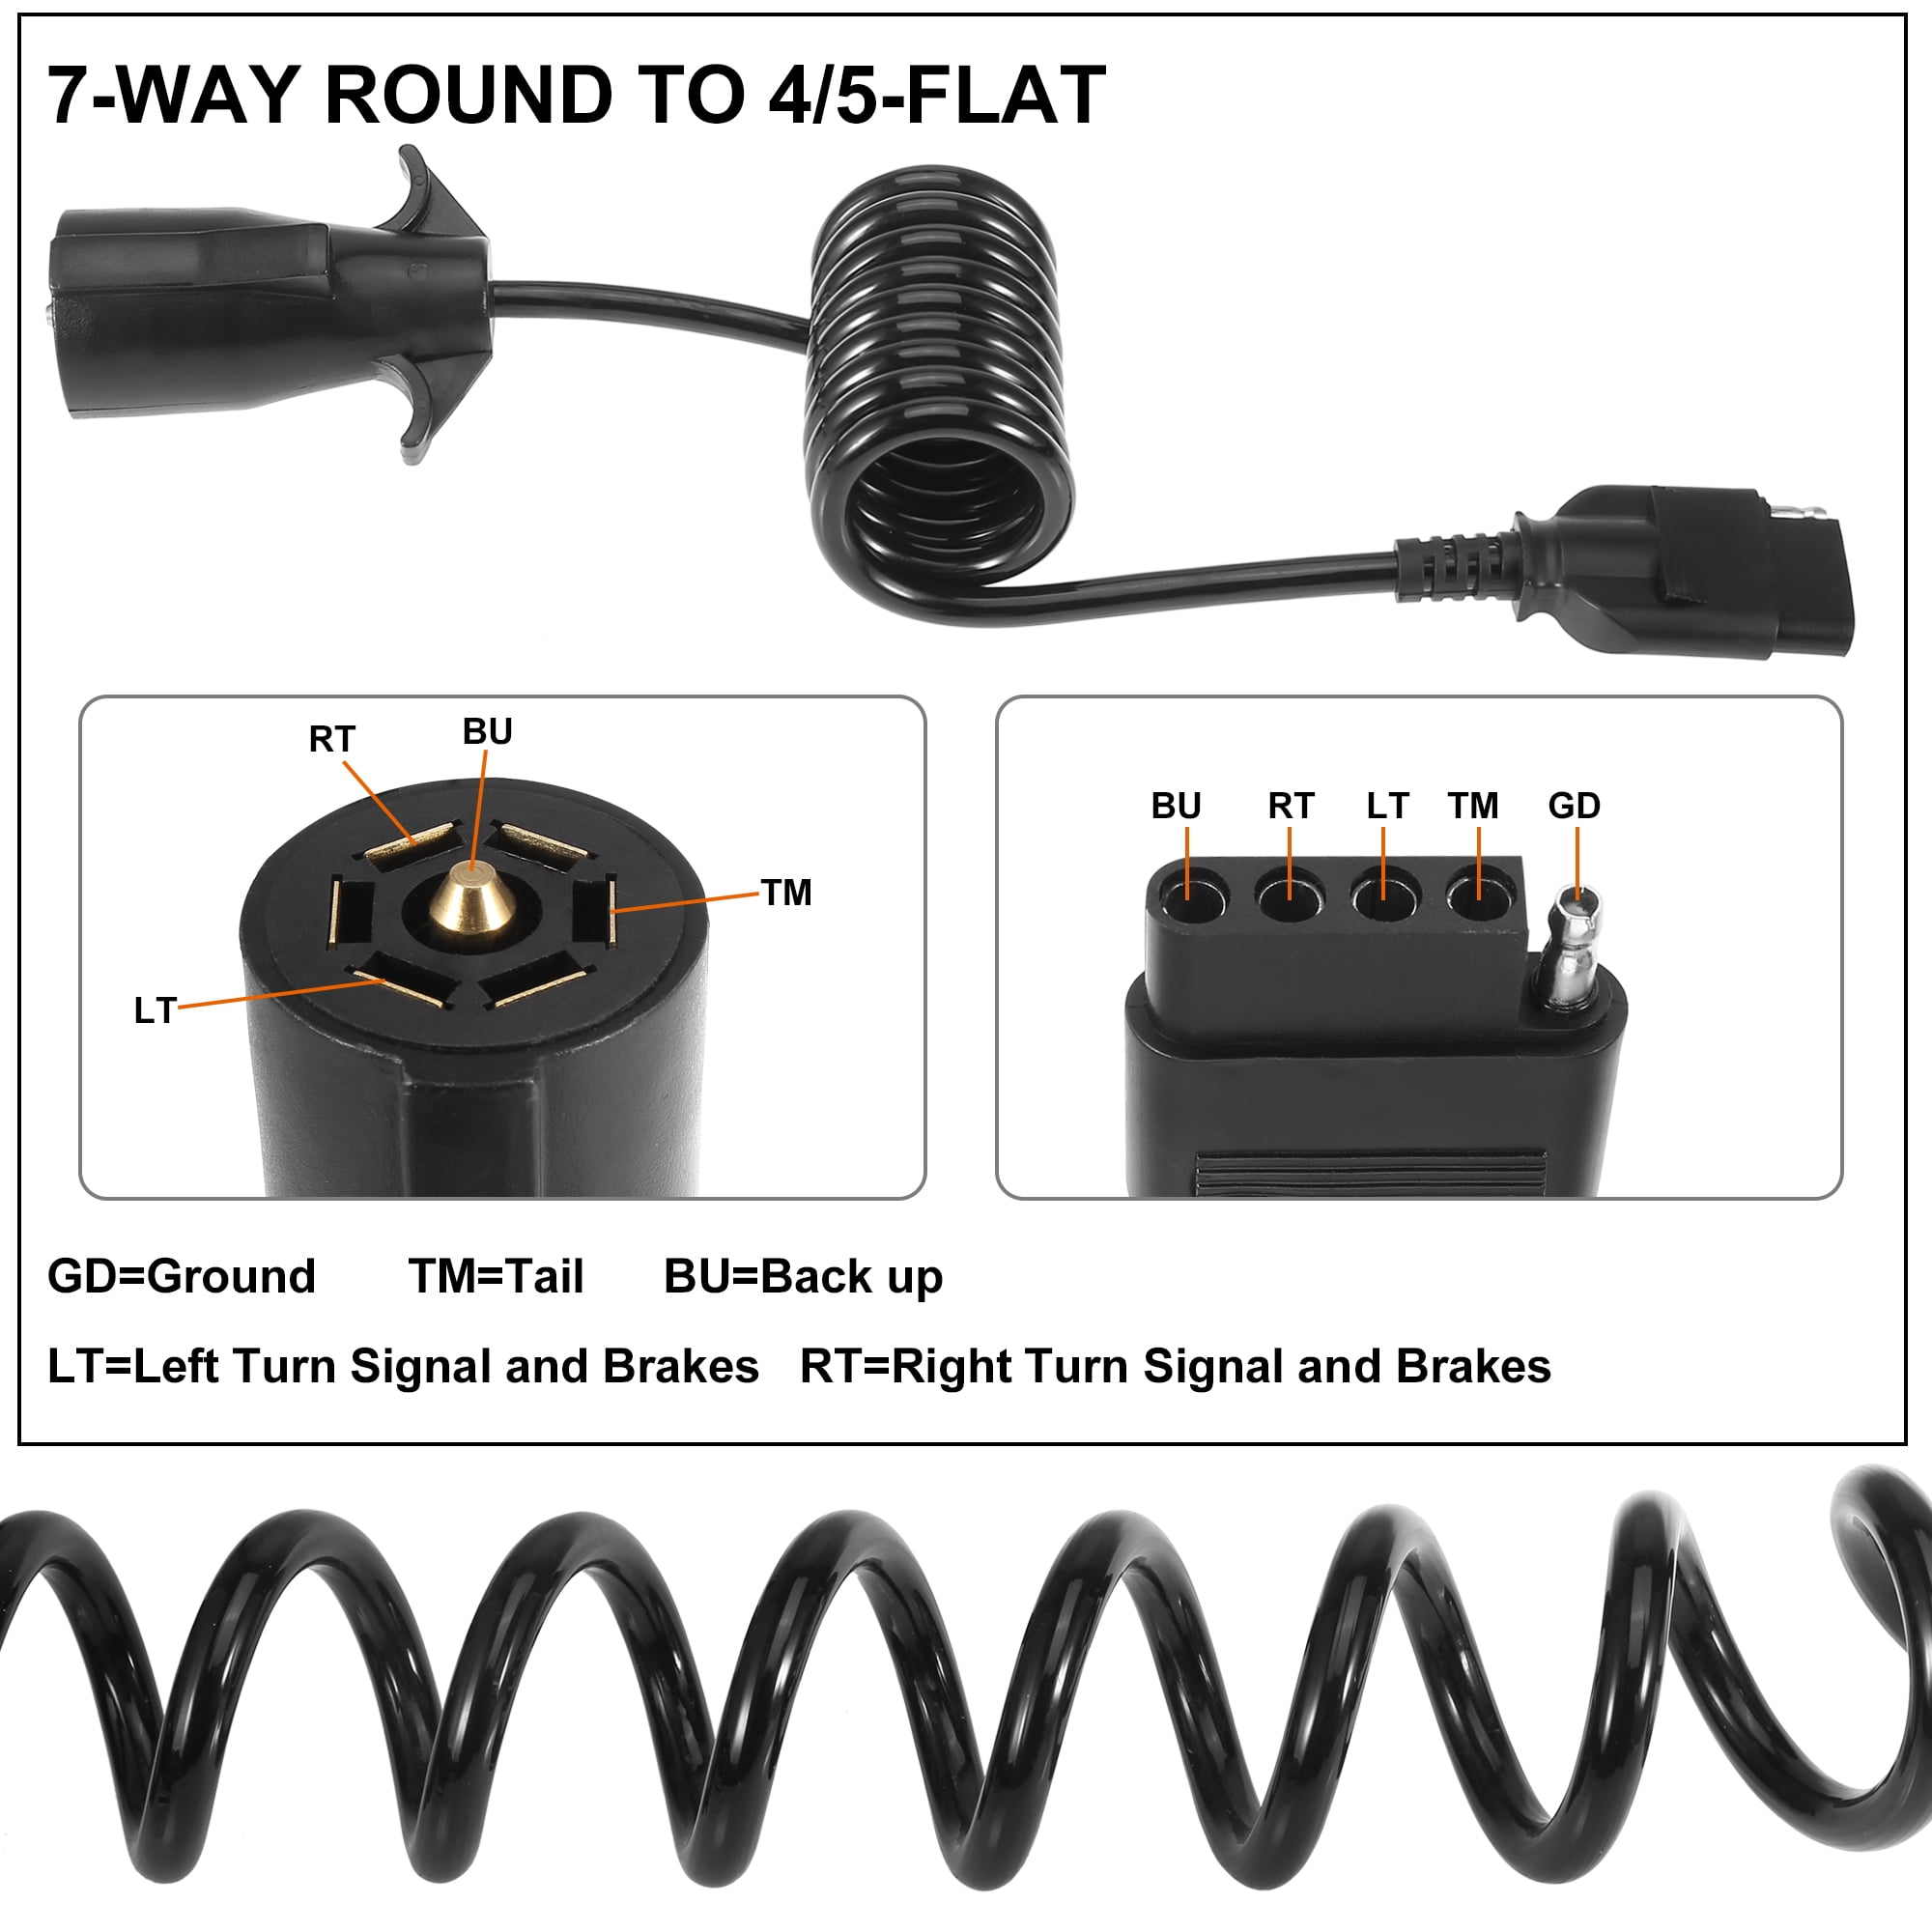 X AUTOHAUX 5ft 7 Way Round to 4 Way Pin Flat Trailer Coiled Wiring Harness Connector Adapter Plug 